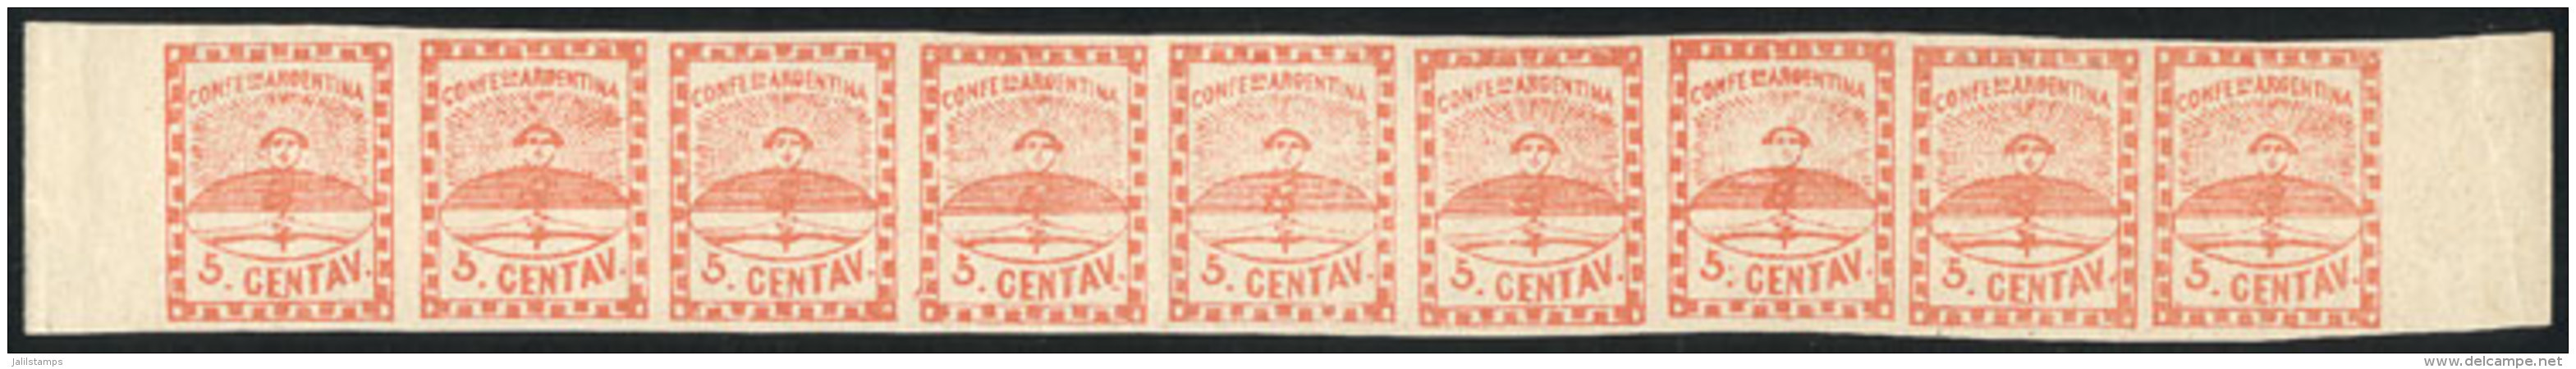 GJ.1, 5 C. Small Figures, Marginal Strip Of 9, Mint Original Gum: 8 Examples MNH And 1 Hinged, VF! - Ungebraucht